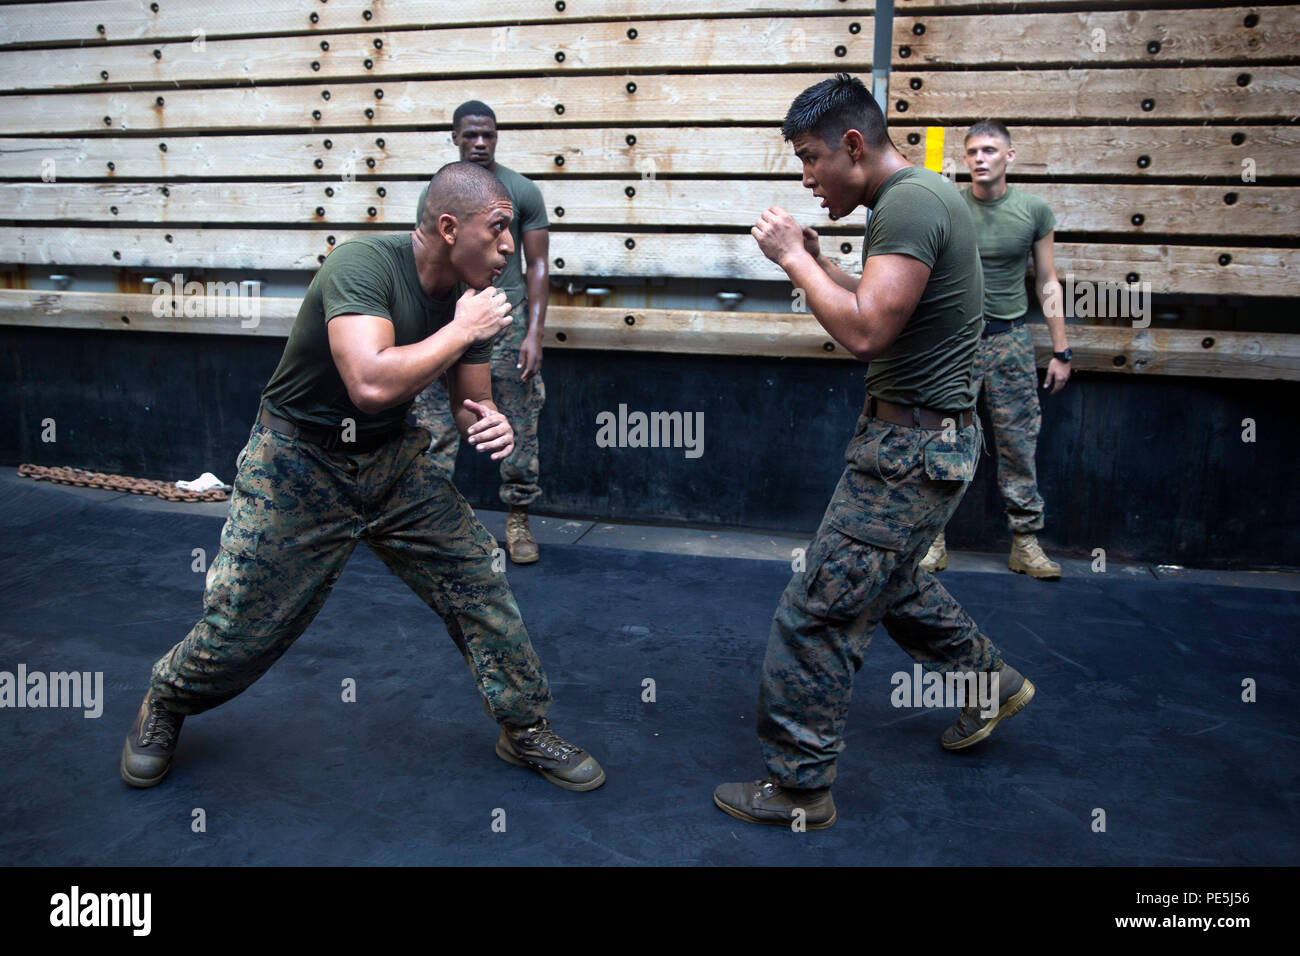 GULF OF ADEN (Oct. 17, 2015)  Marine Sgt. Marcos Gonzalez, left, spars  with Lance Cpl. Giovanni Carrera during the combat conditioning portion of  a Marine Corps Martial Arts Program black belt